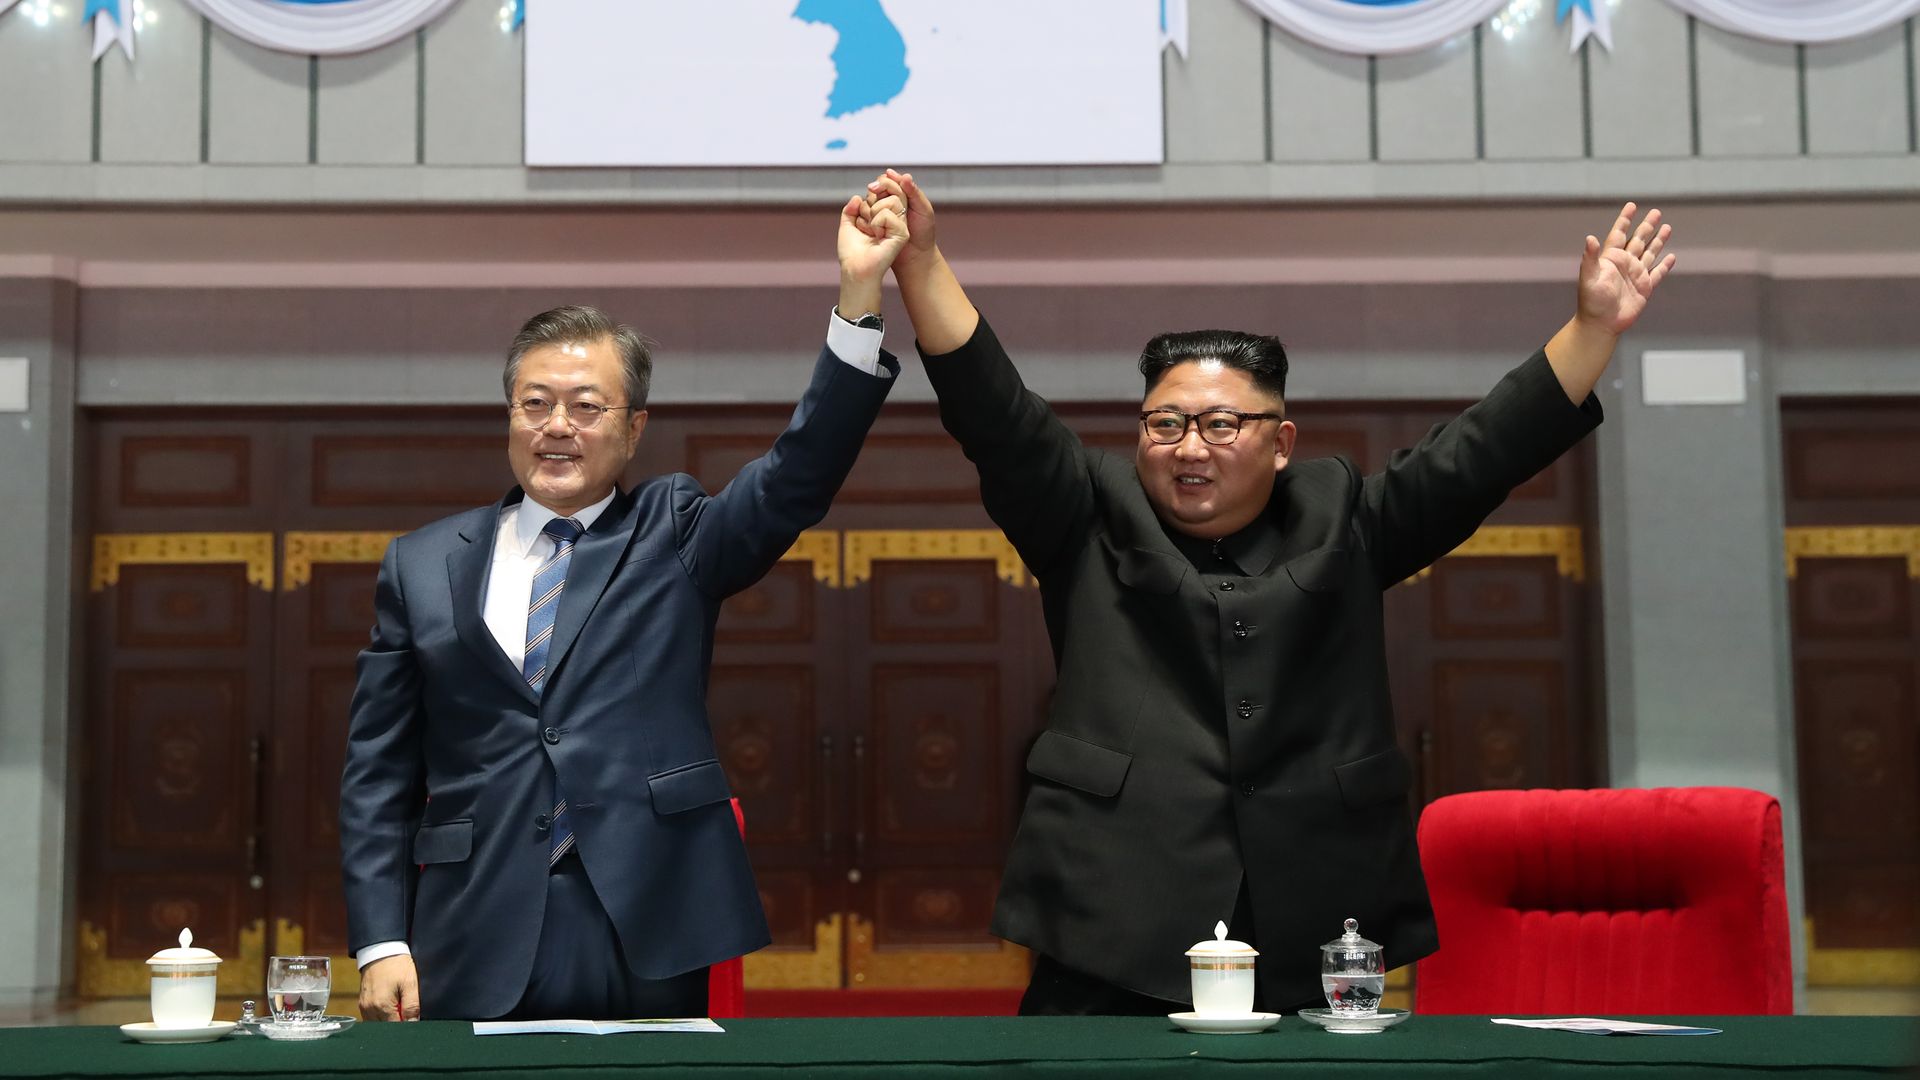 South Korean president and North Korean dictator raising hands together